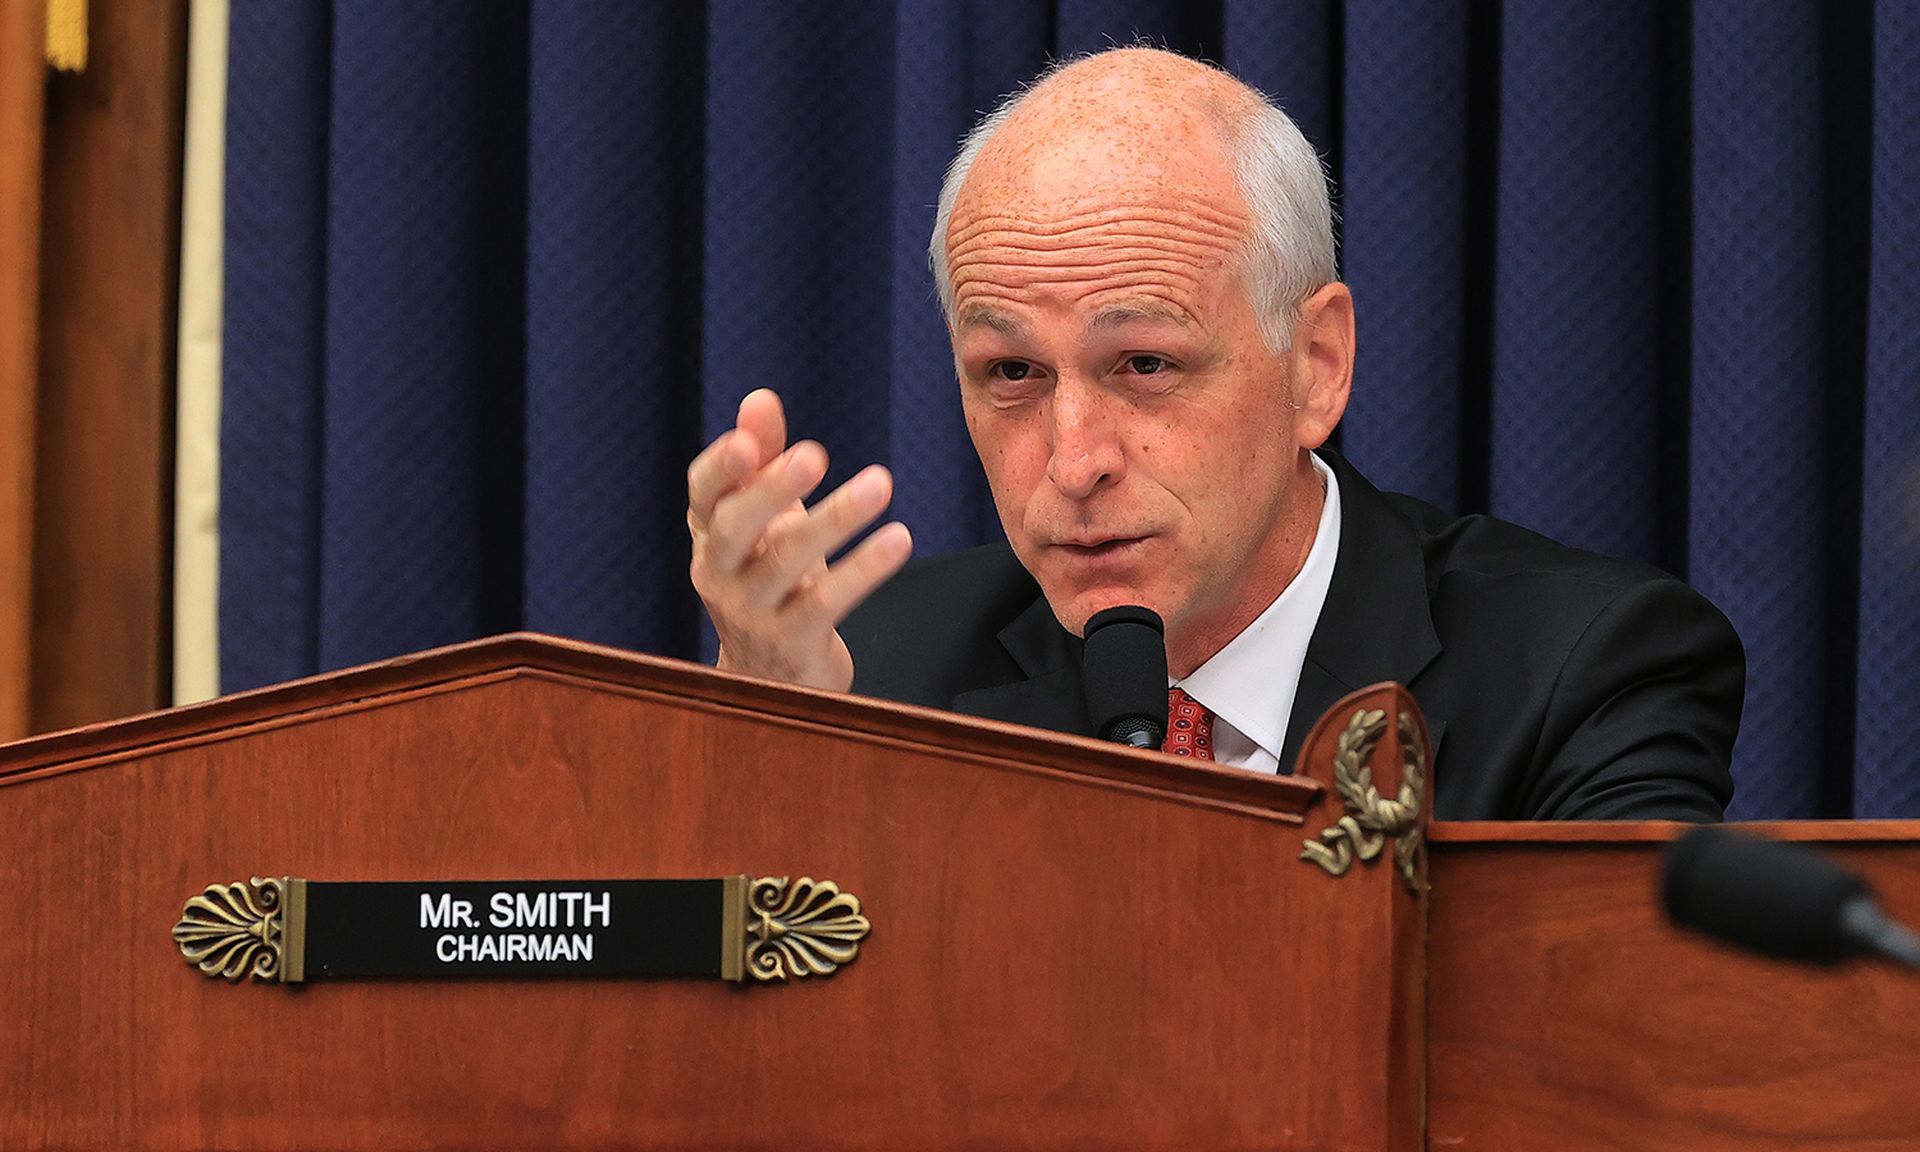 House Armed Services Committee Chairman Adam Smith questions witnesses about the FY2022 defense budget request in the Rayburn House Office Building on Capitol Hill, June 29, 2021, in Washington. (Photo by Chip Somodevilla/Getty Images)